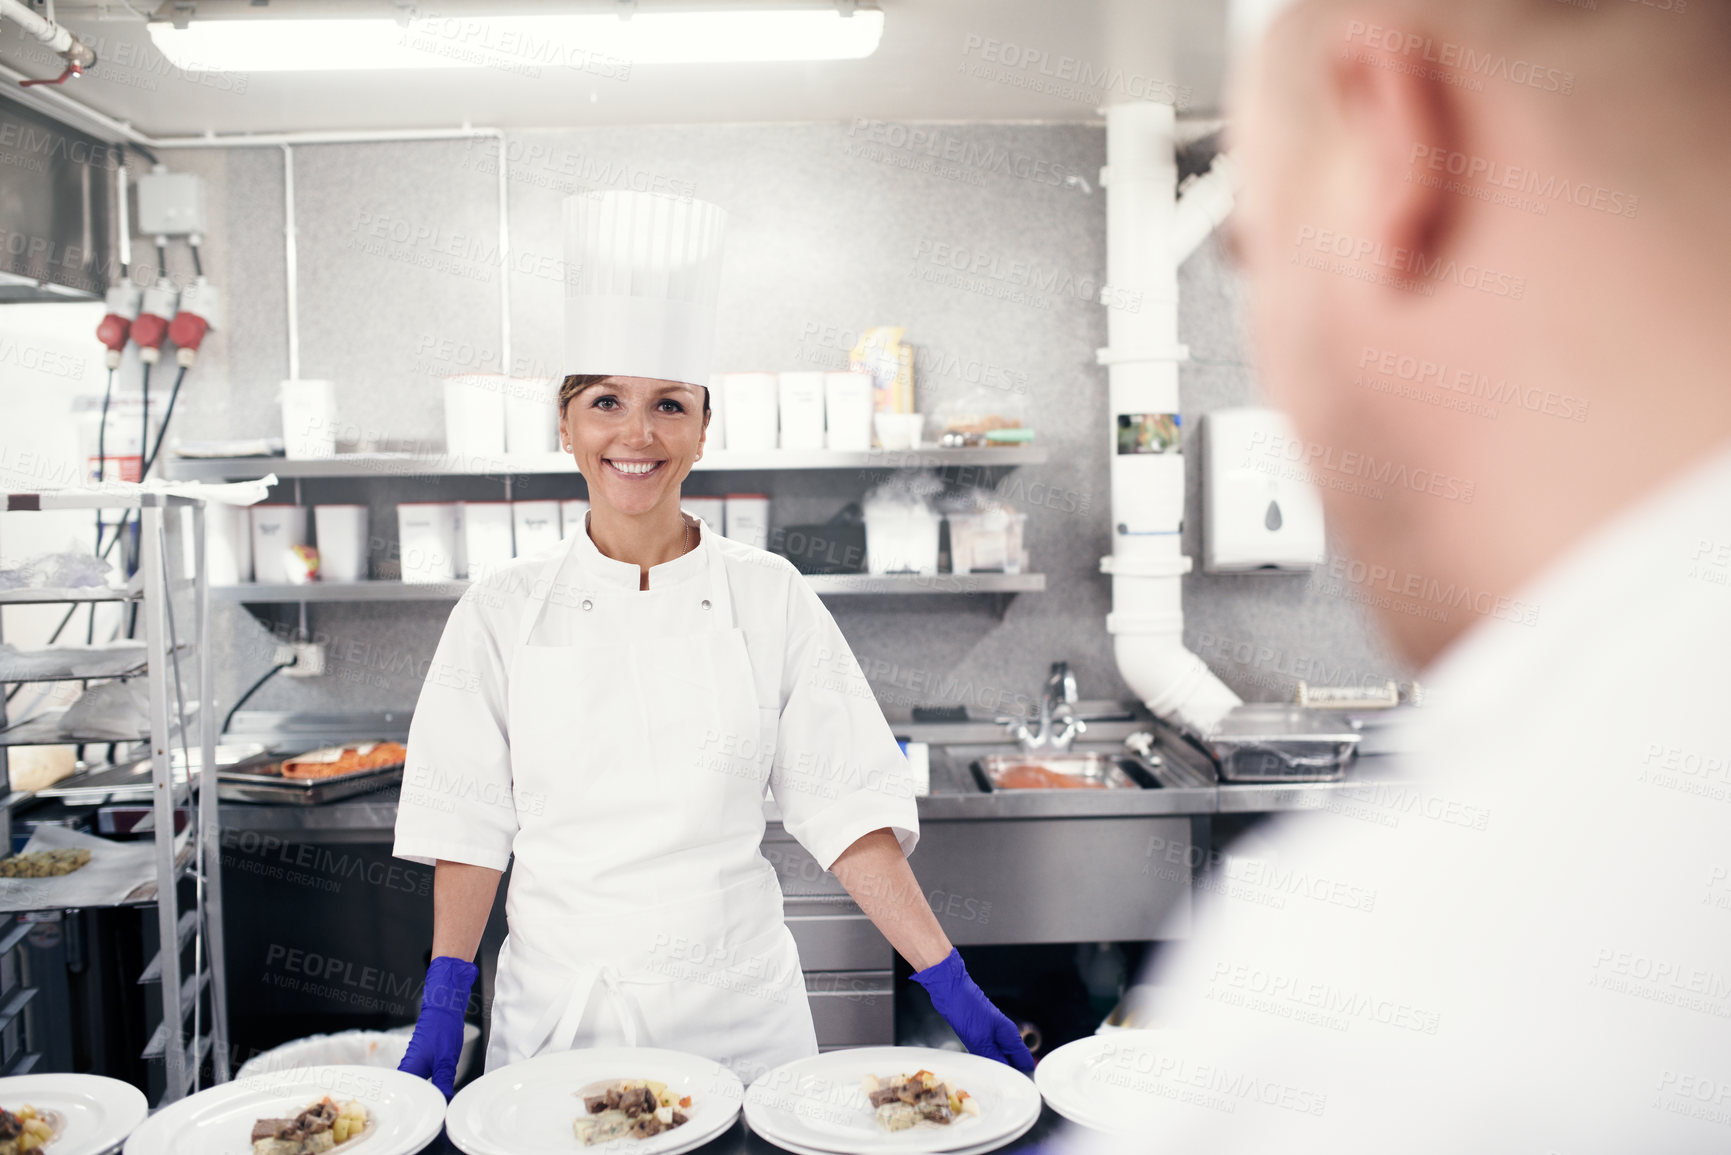 Buy stock photo Shot of chefs preparing a meal service in a professional kitchen